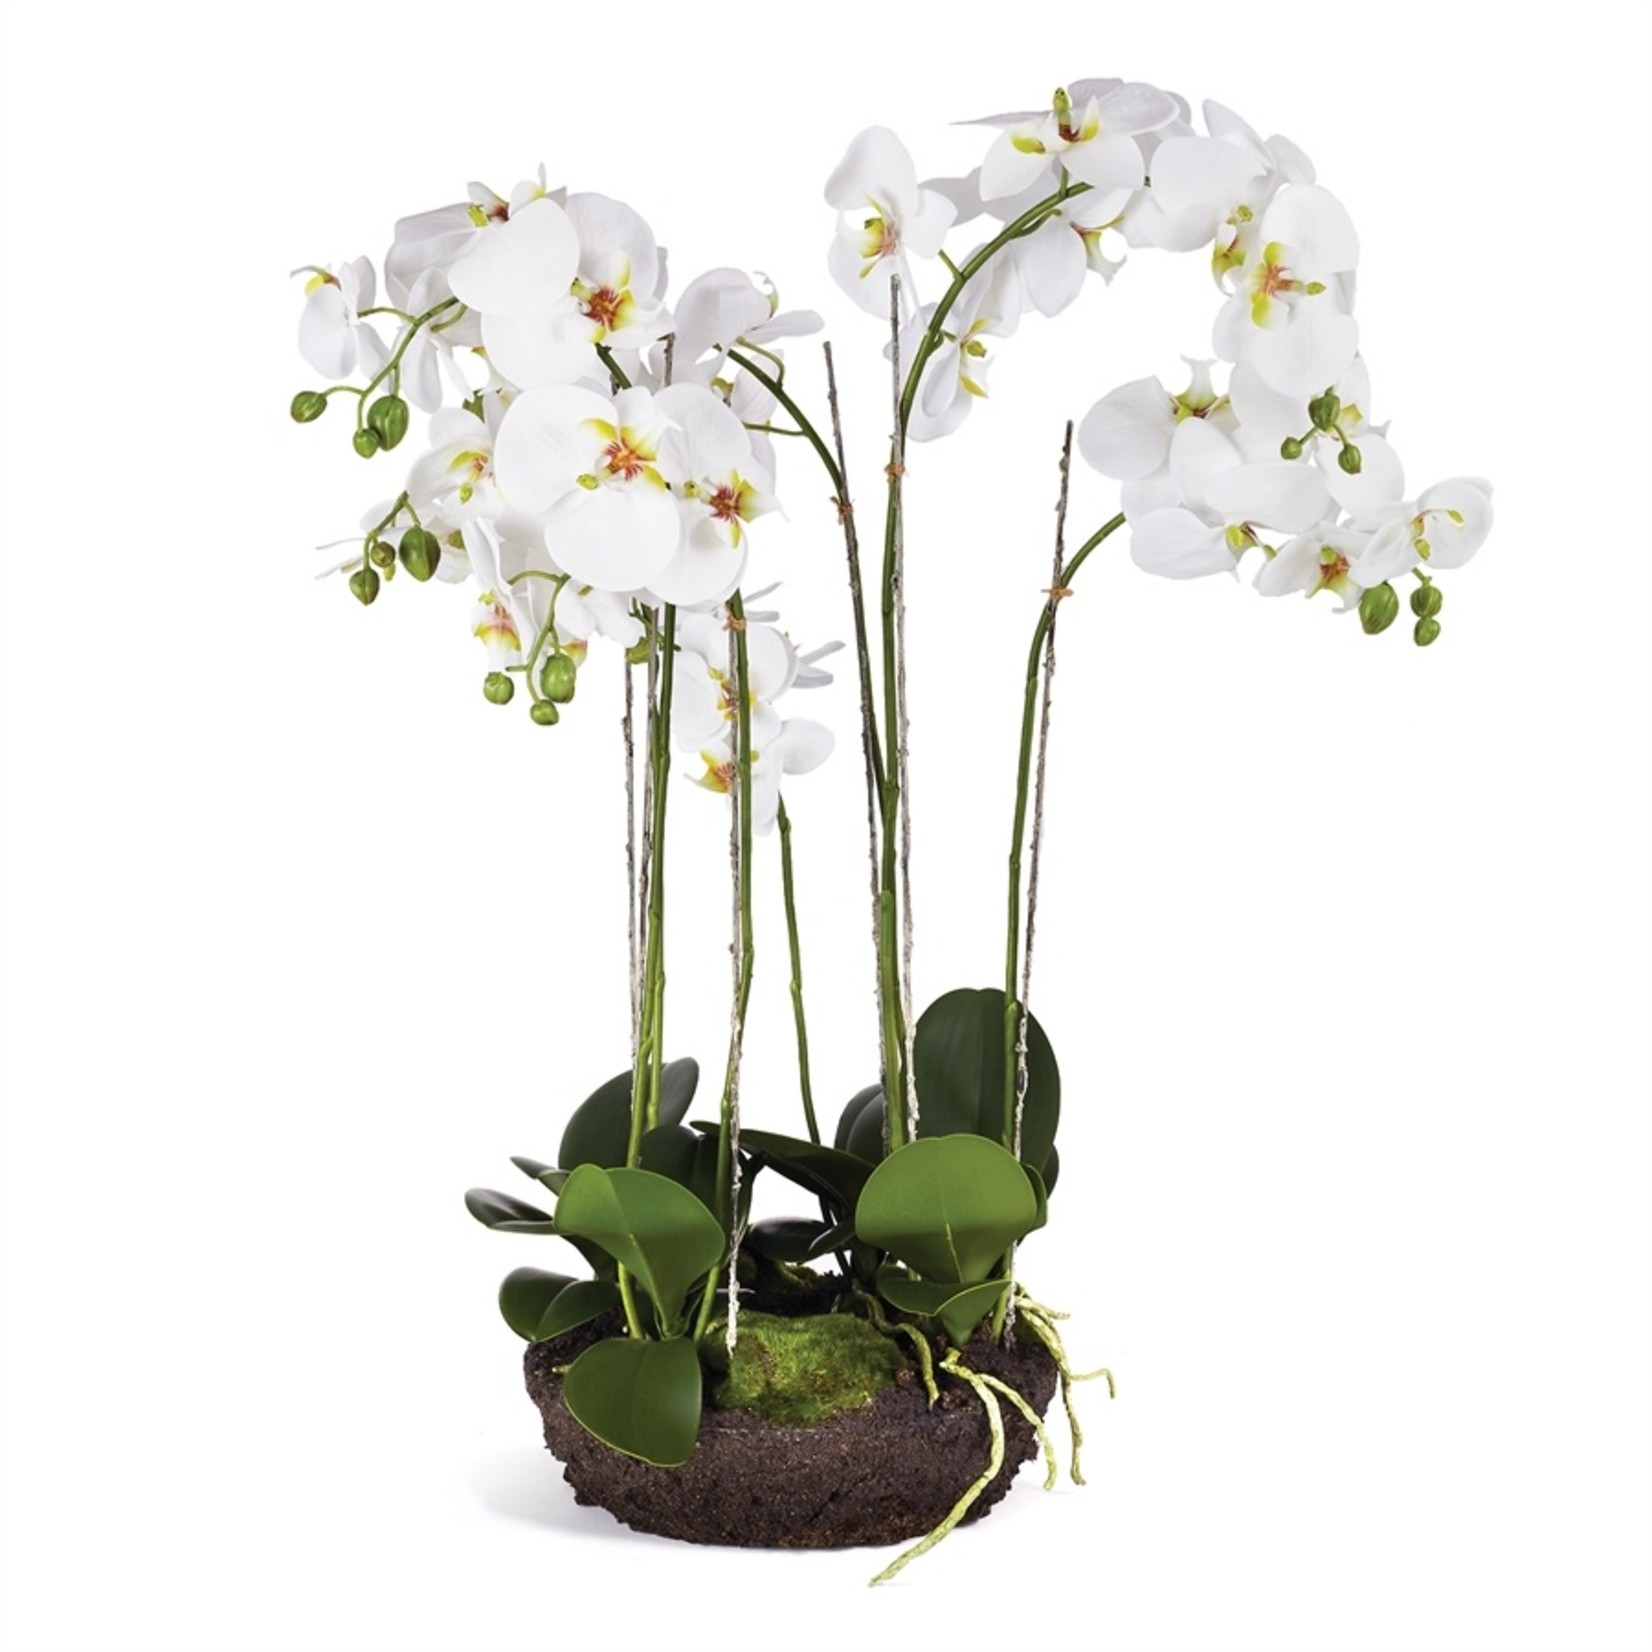 Napa Home and Garden Phalaenopsis White Orchid Bowl Drop-In 31.5"